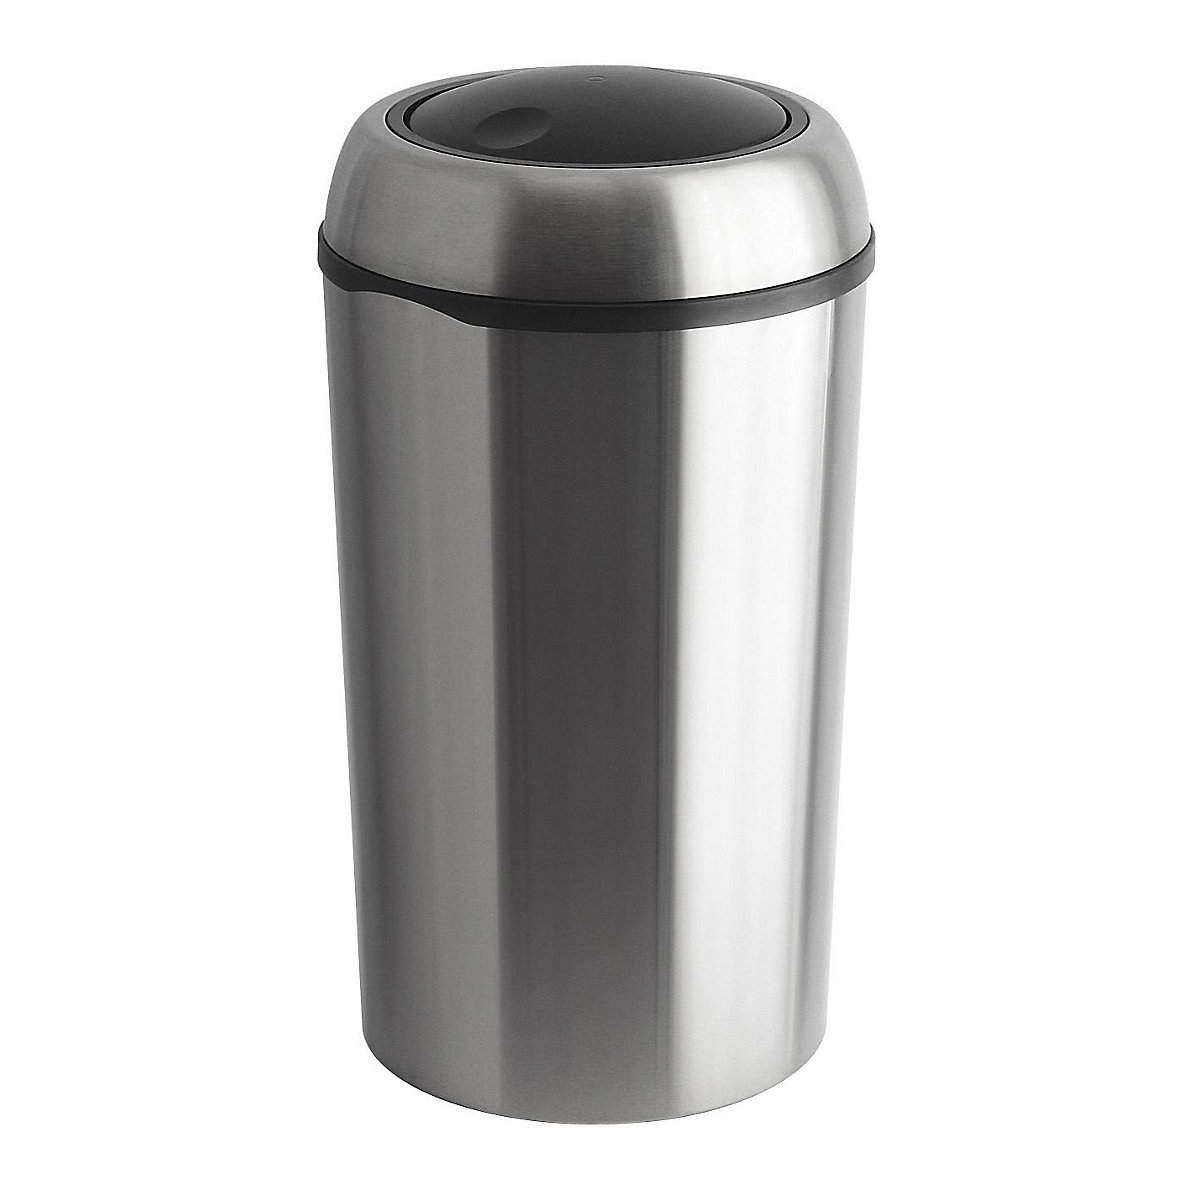 Stainless steel waste collector